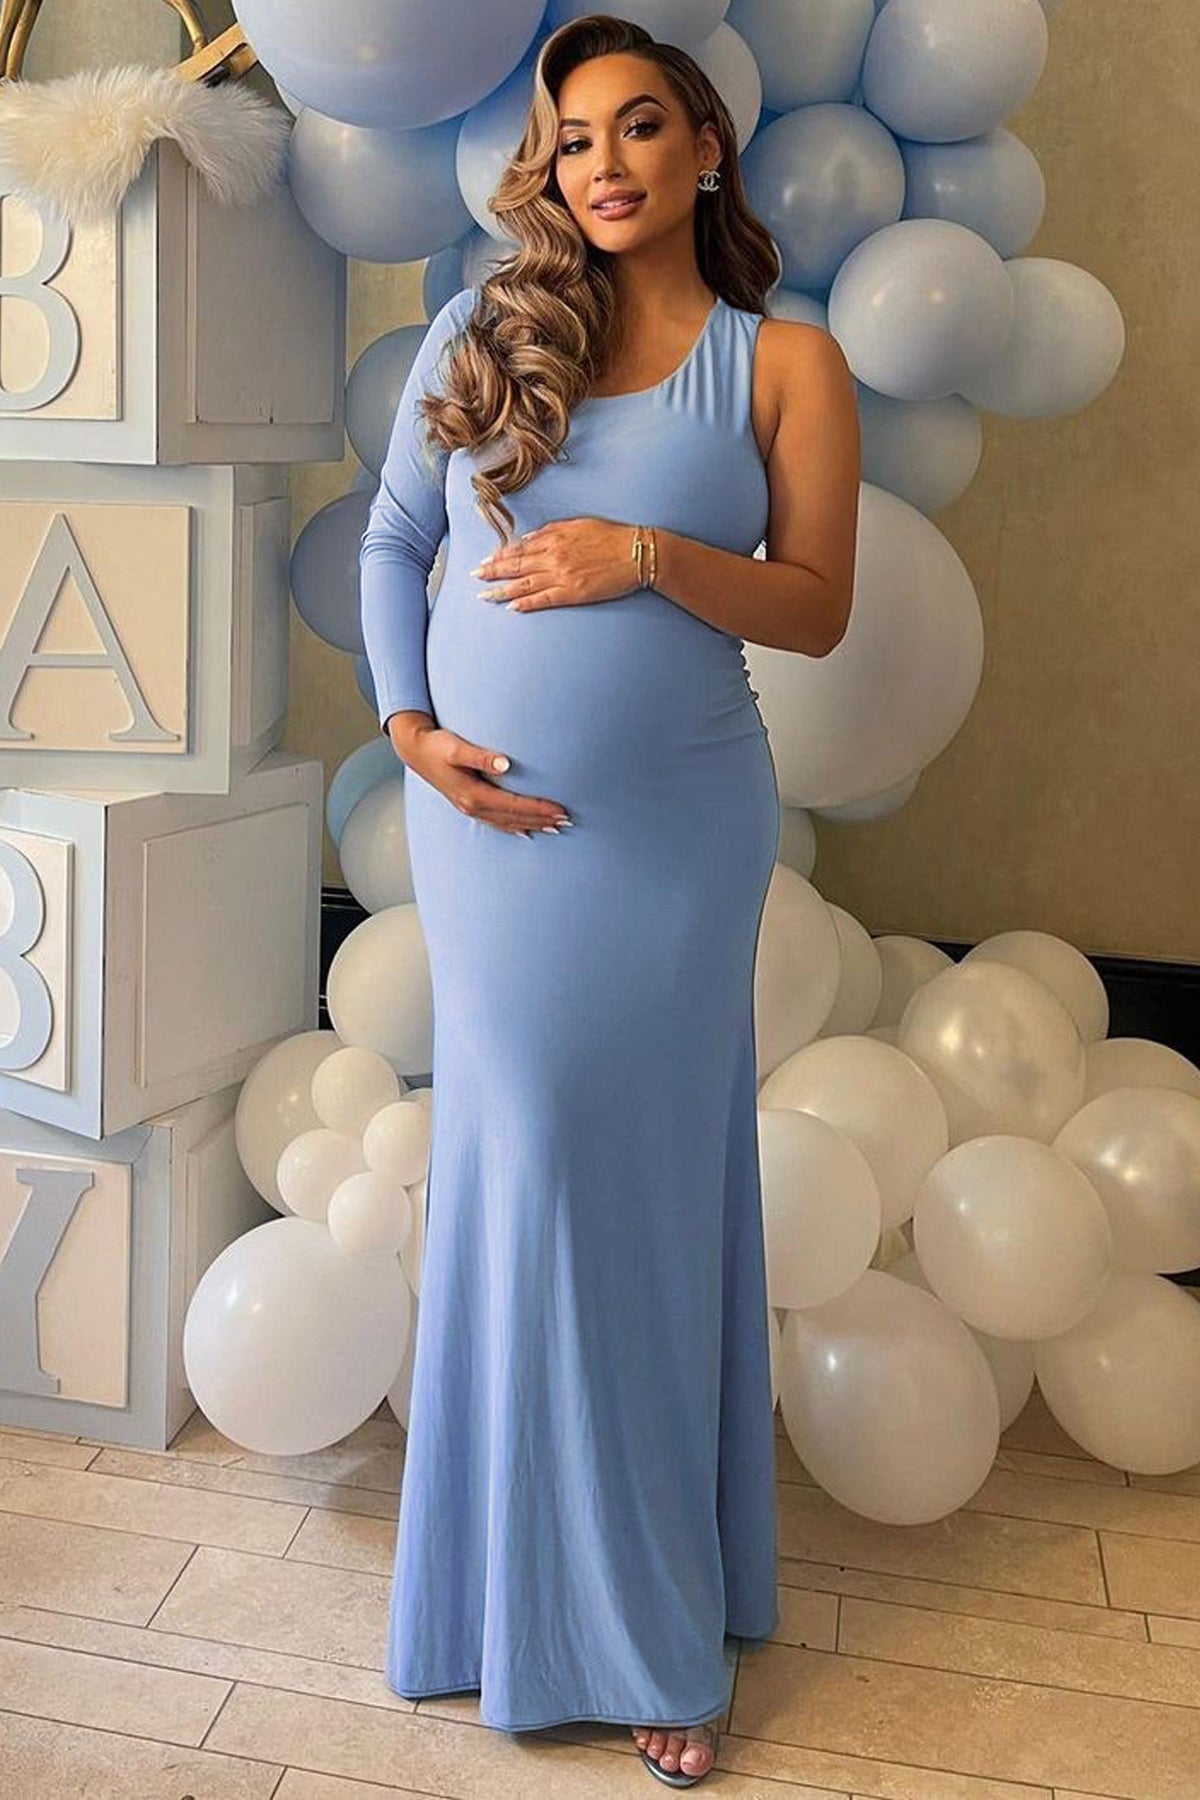 Maternity Photography Props Floral Lace Dress Fancy Pregnancy Gown for Baby  Shower Photo Shoot